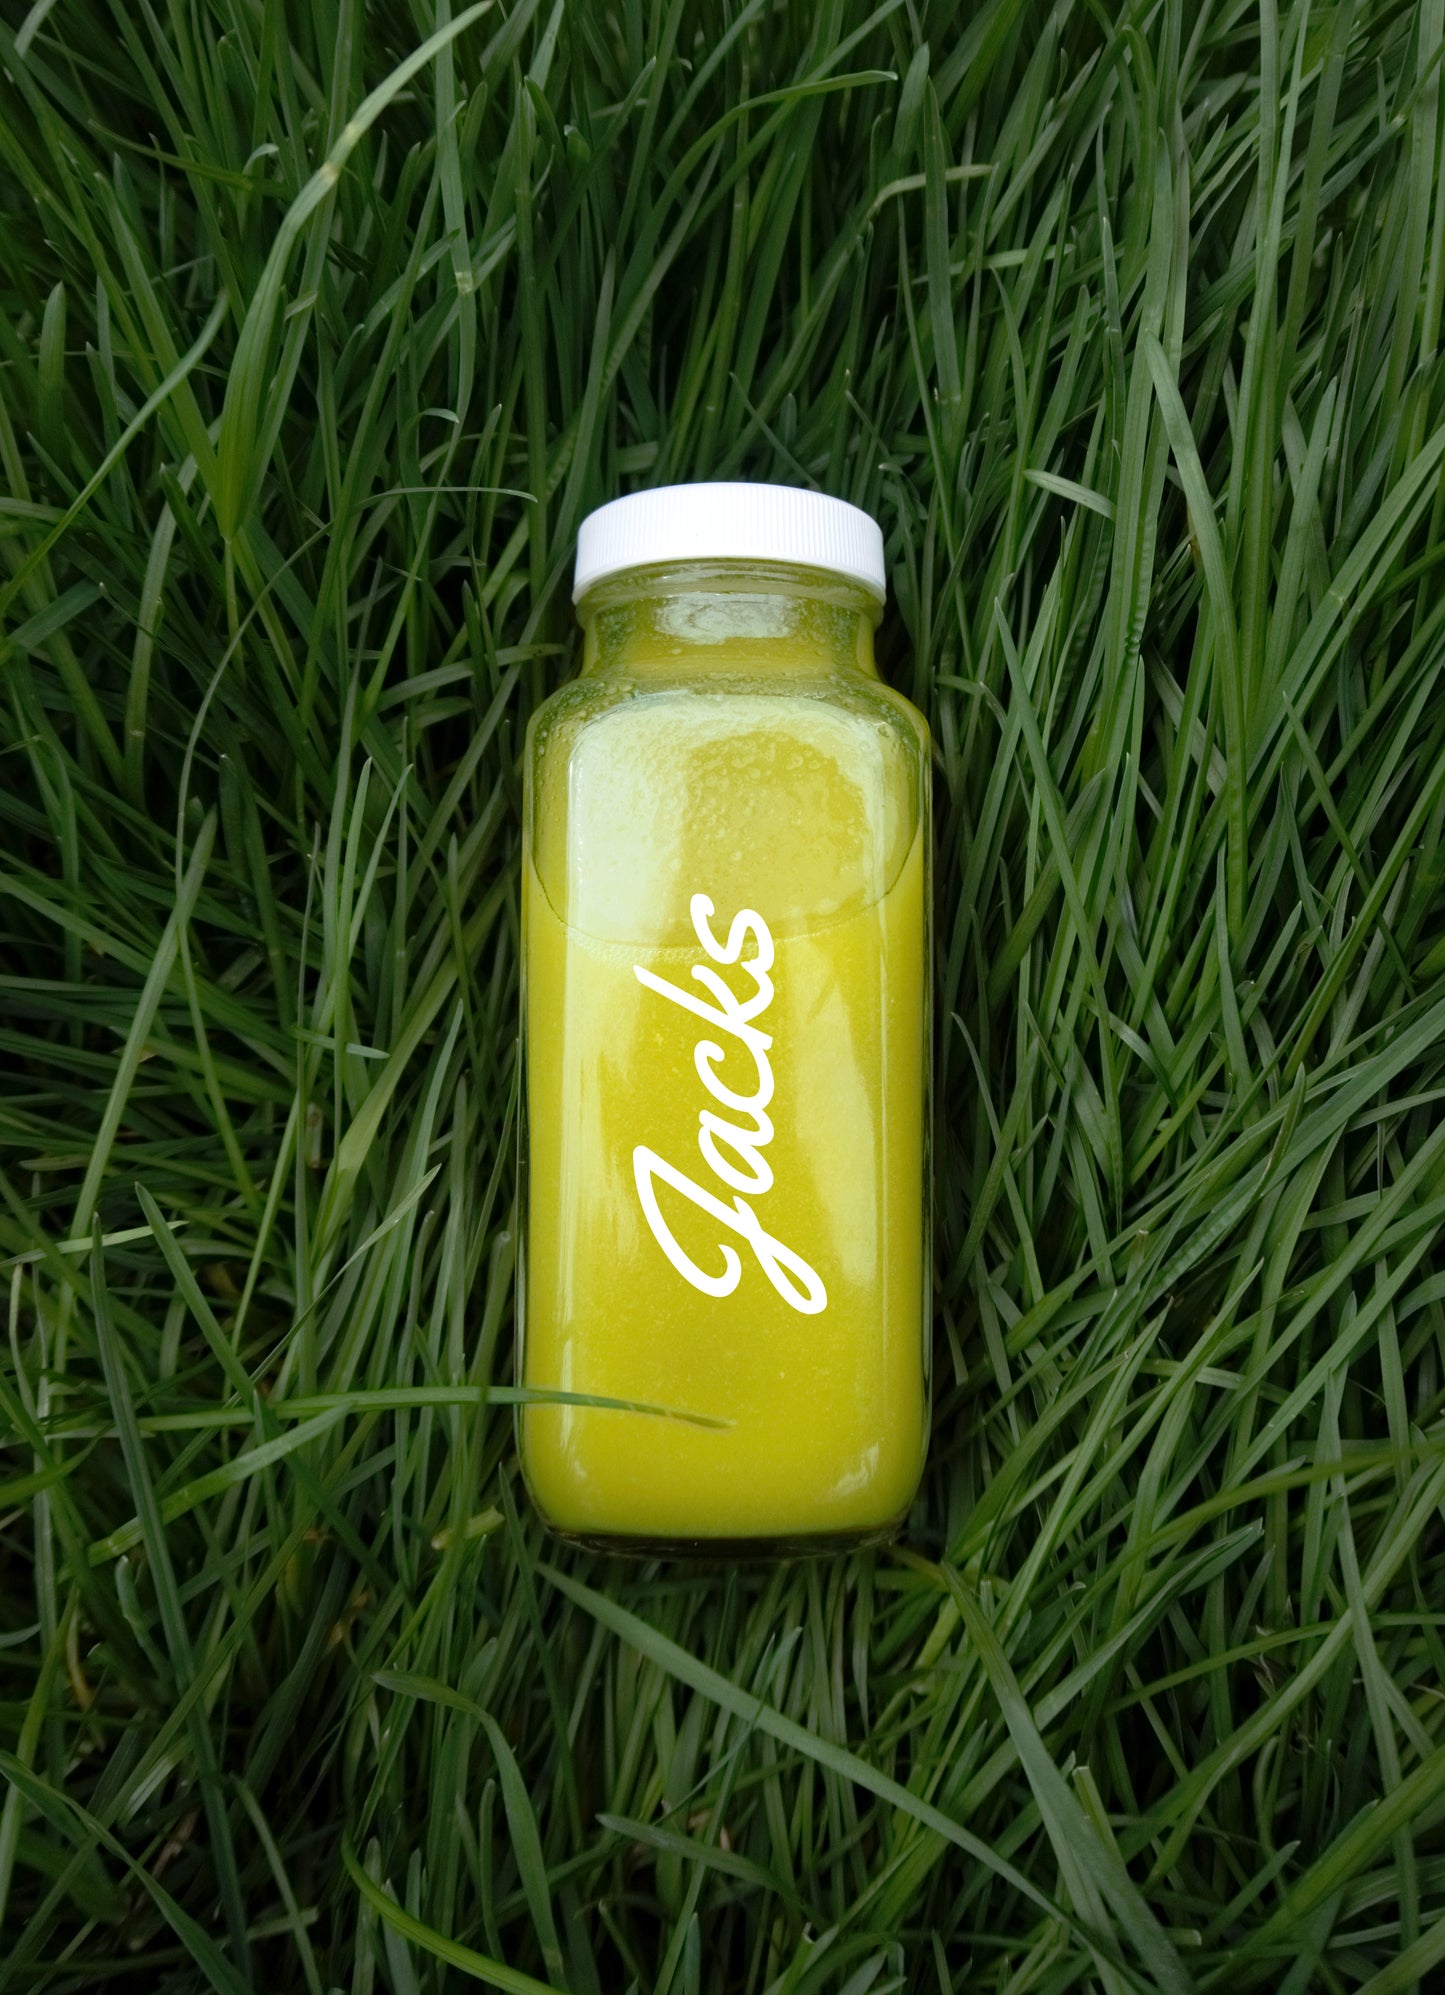 A 250ml glass bottle of light green liquid, with a simple "Jacks" written in white cursive font placed vertically up the length of the bottle, nestled in a background of lush green grass.